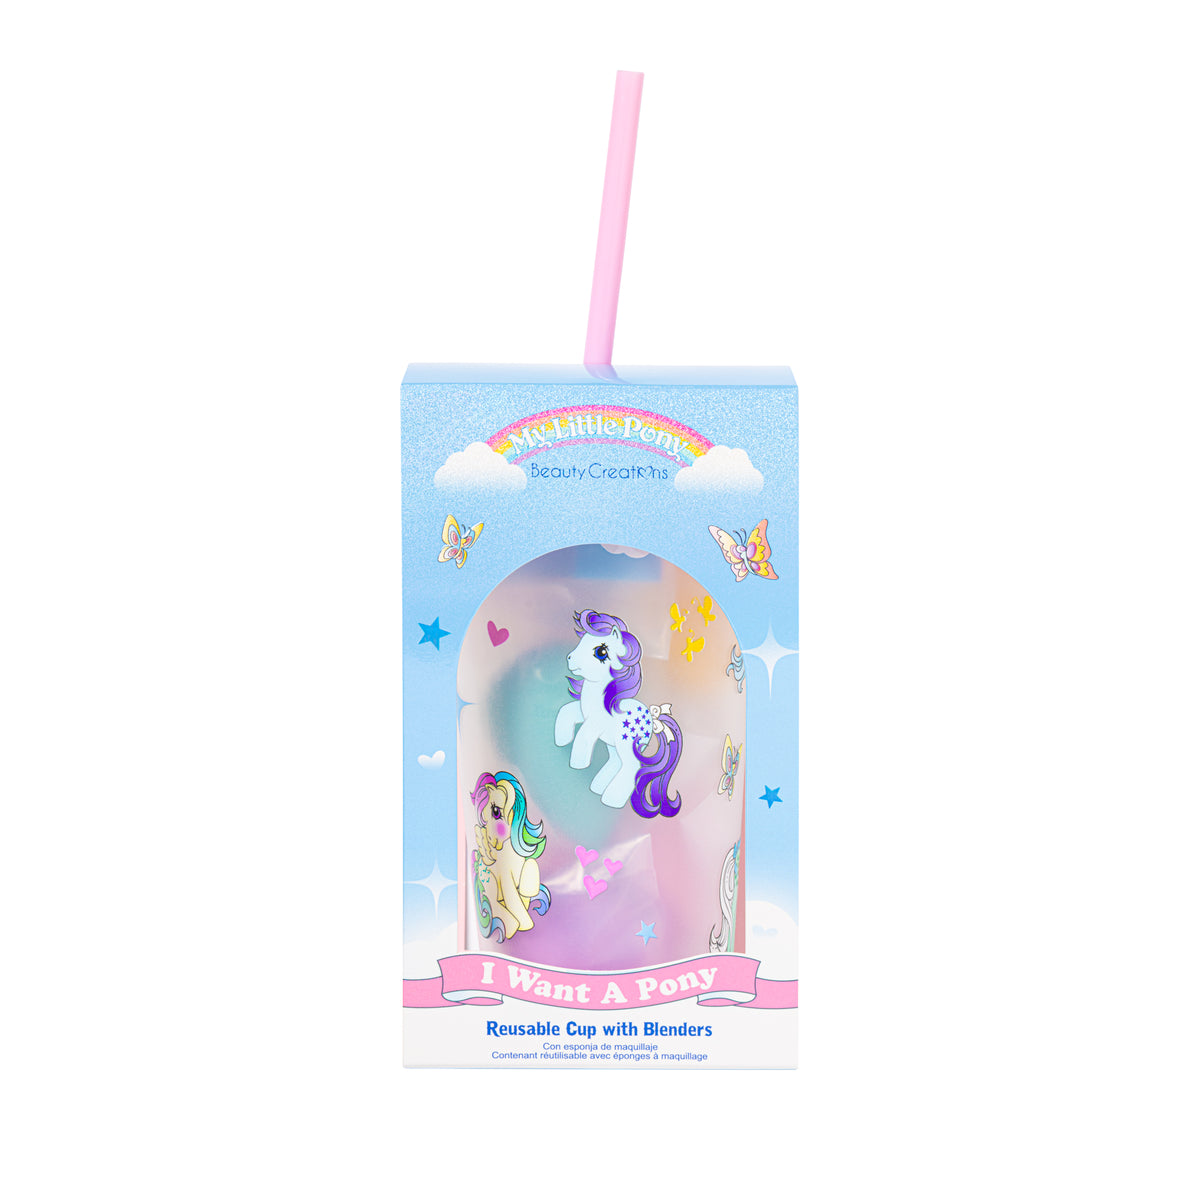 "I WANT A  PONY" REUSABLE CUP WITH BLENDERS MY LITTLE PONY - BEAUTY CREATIONS